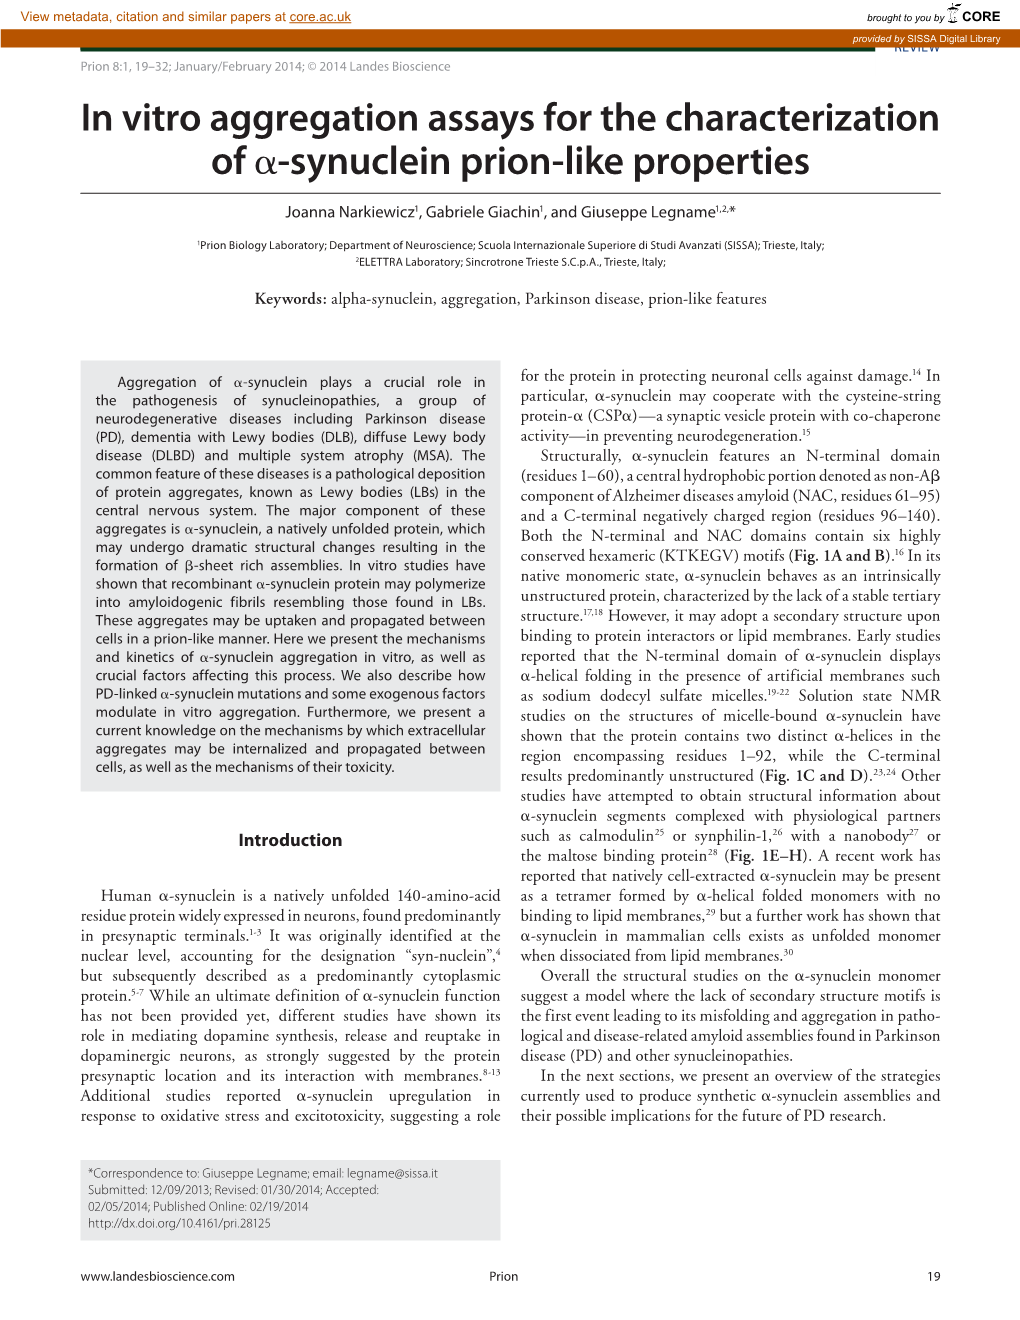 In Vitro Aggregation Assays for the Characterization of Α-Synuclein Prion-Like Properties